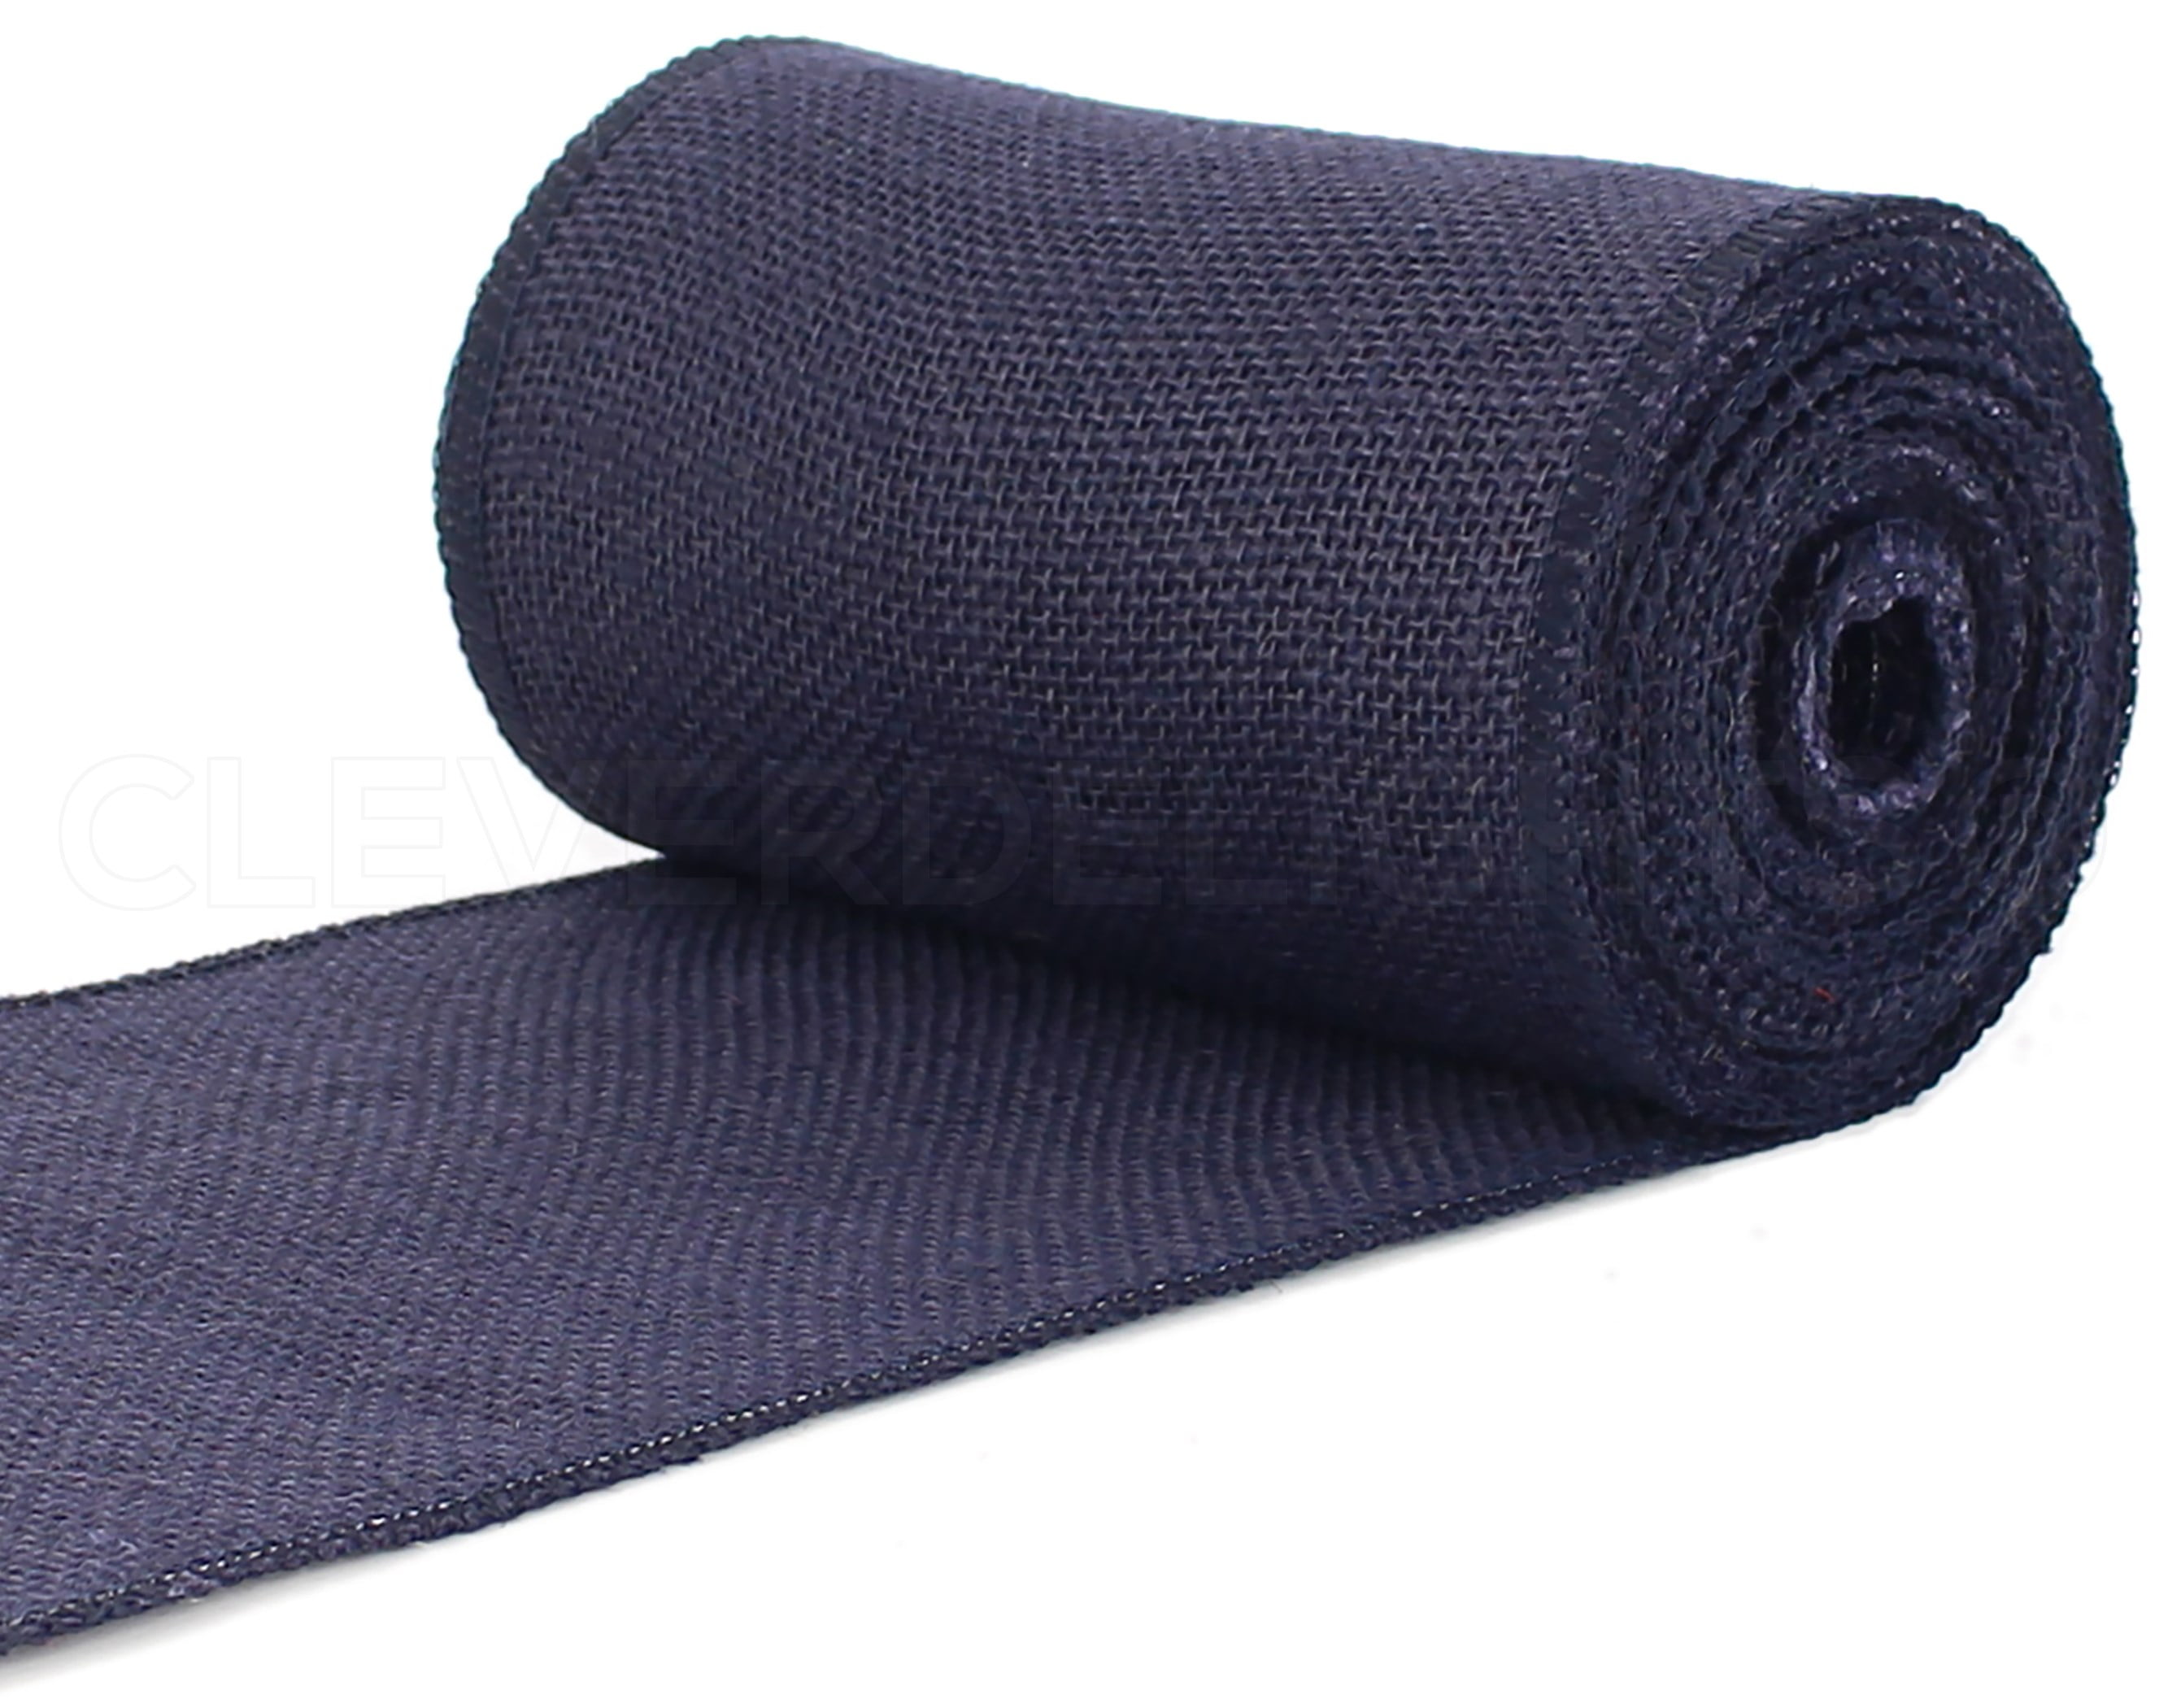 CleverDelights 6 Navy Burlap Roll - Finished Edges